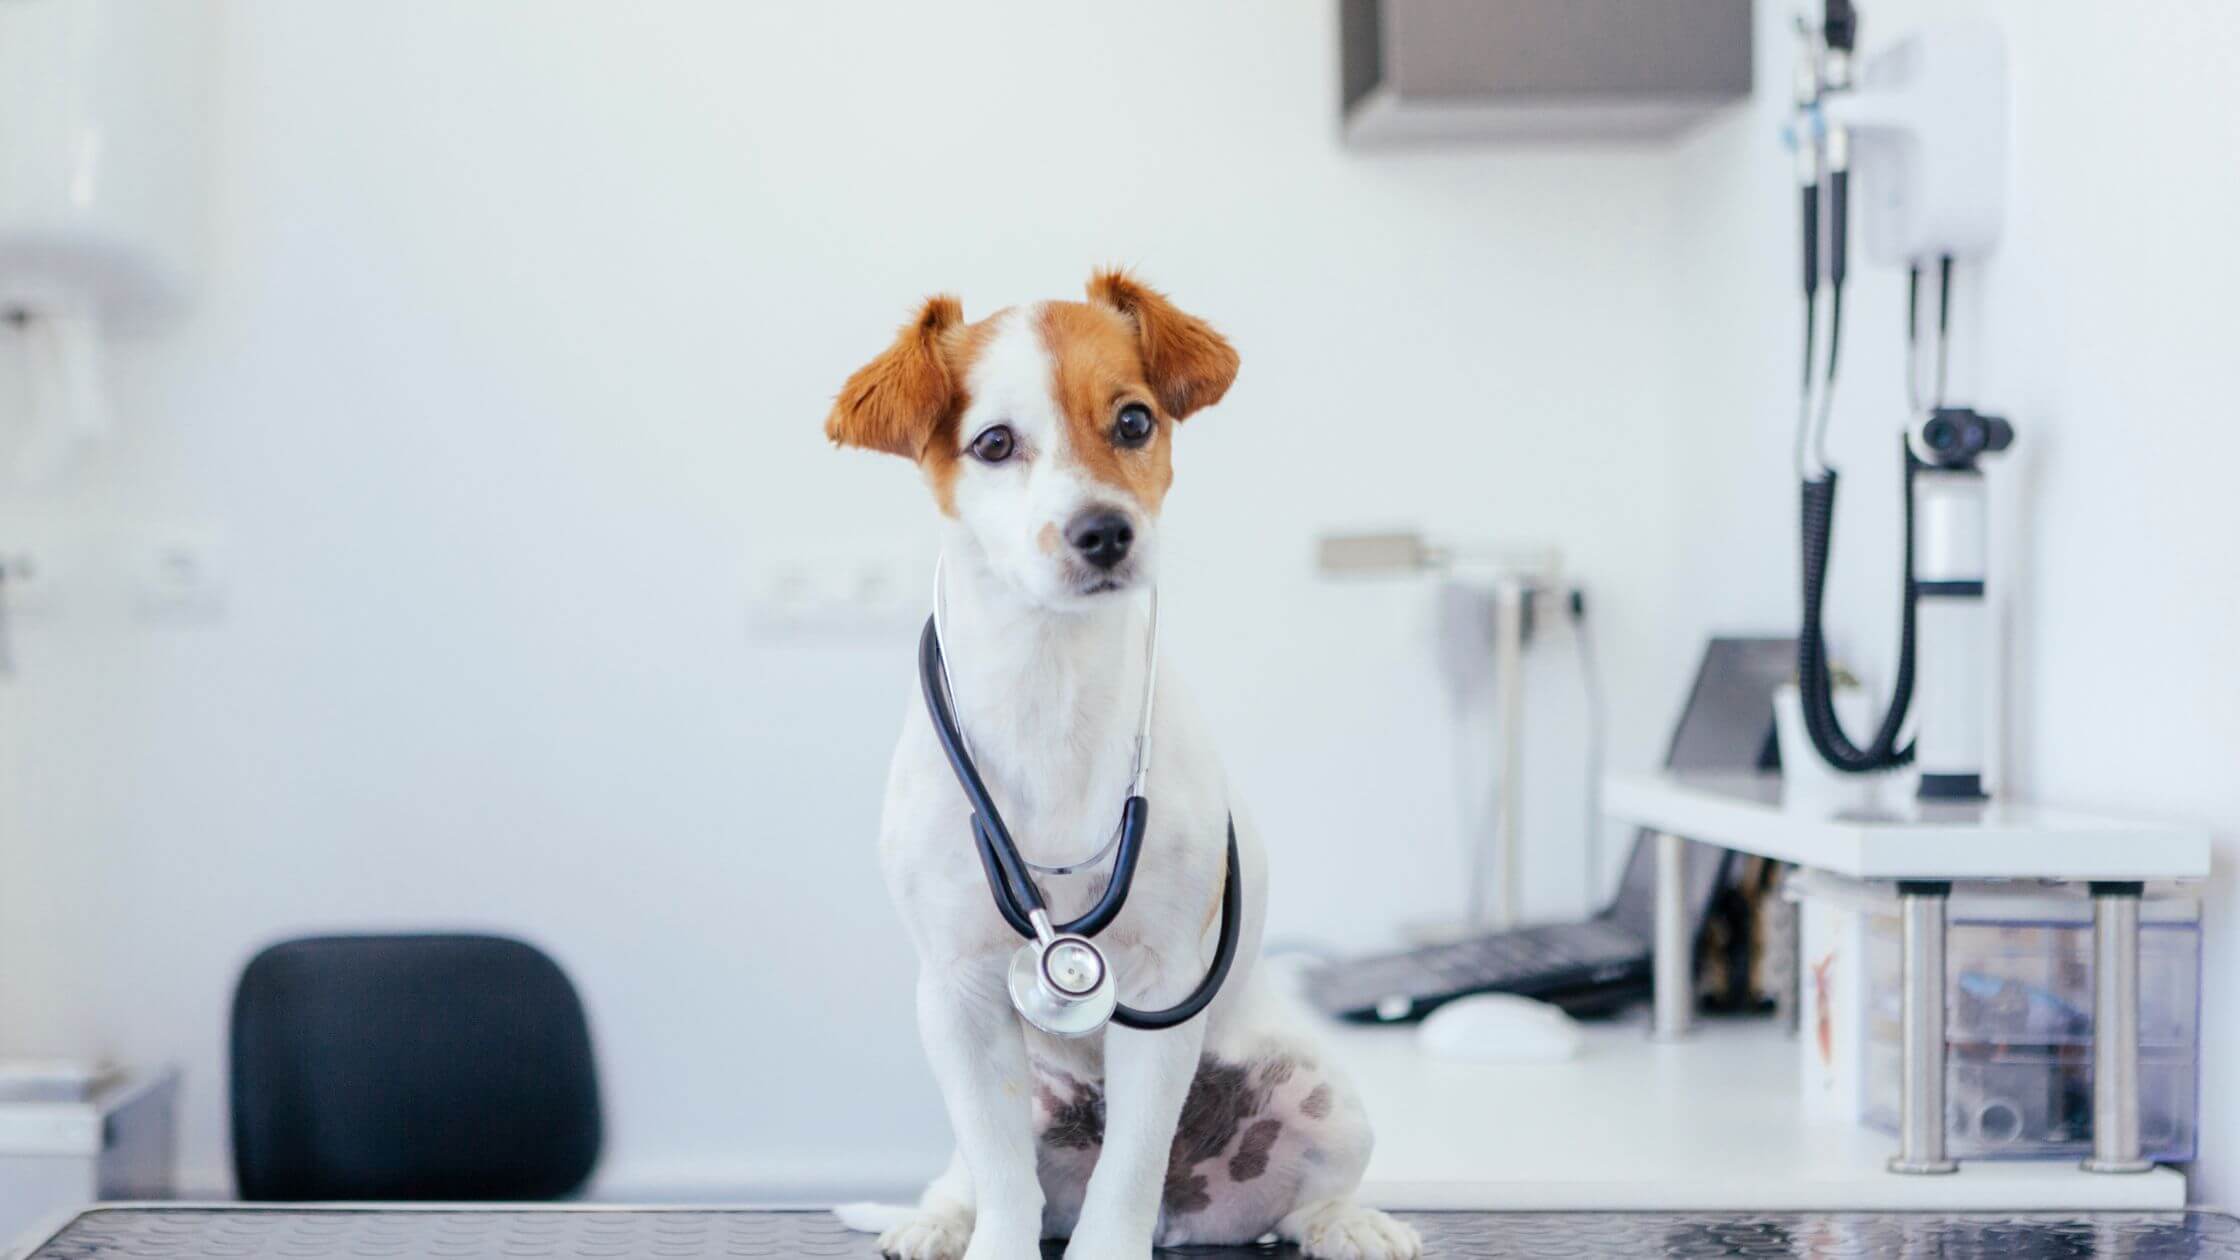 Puppy Jack Russel Terrier is sitting in veterinarian examination room with stethoscope around it's neck